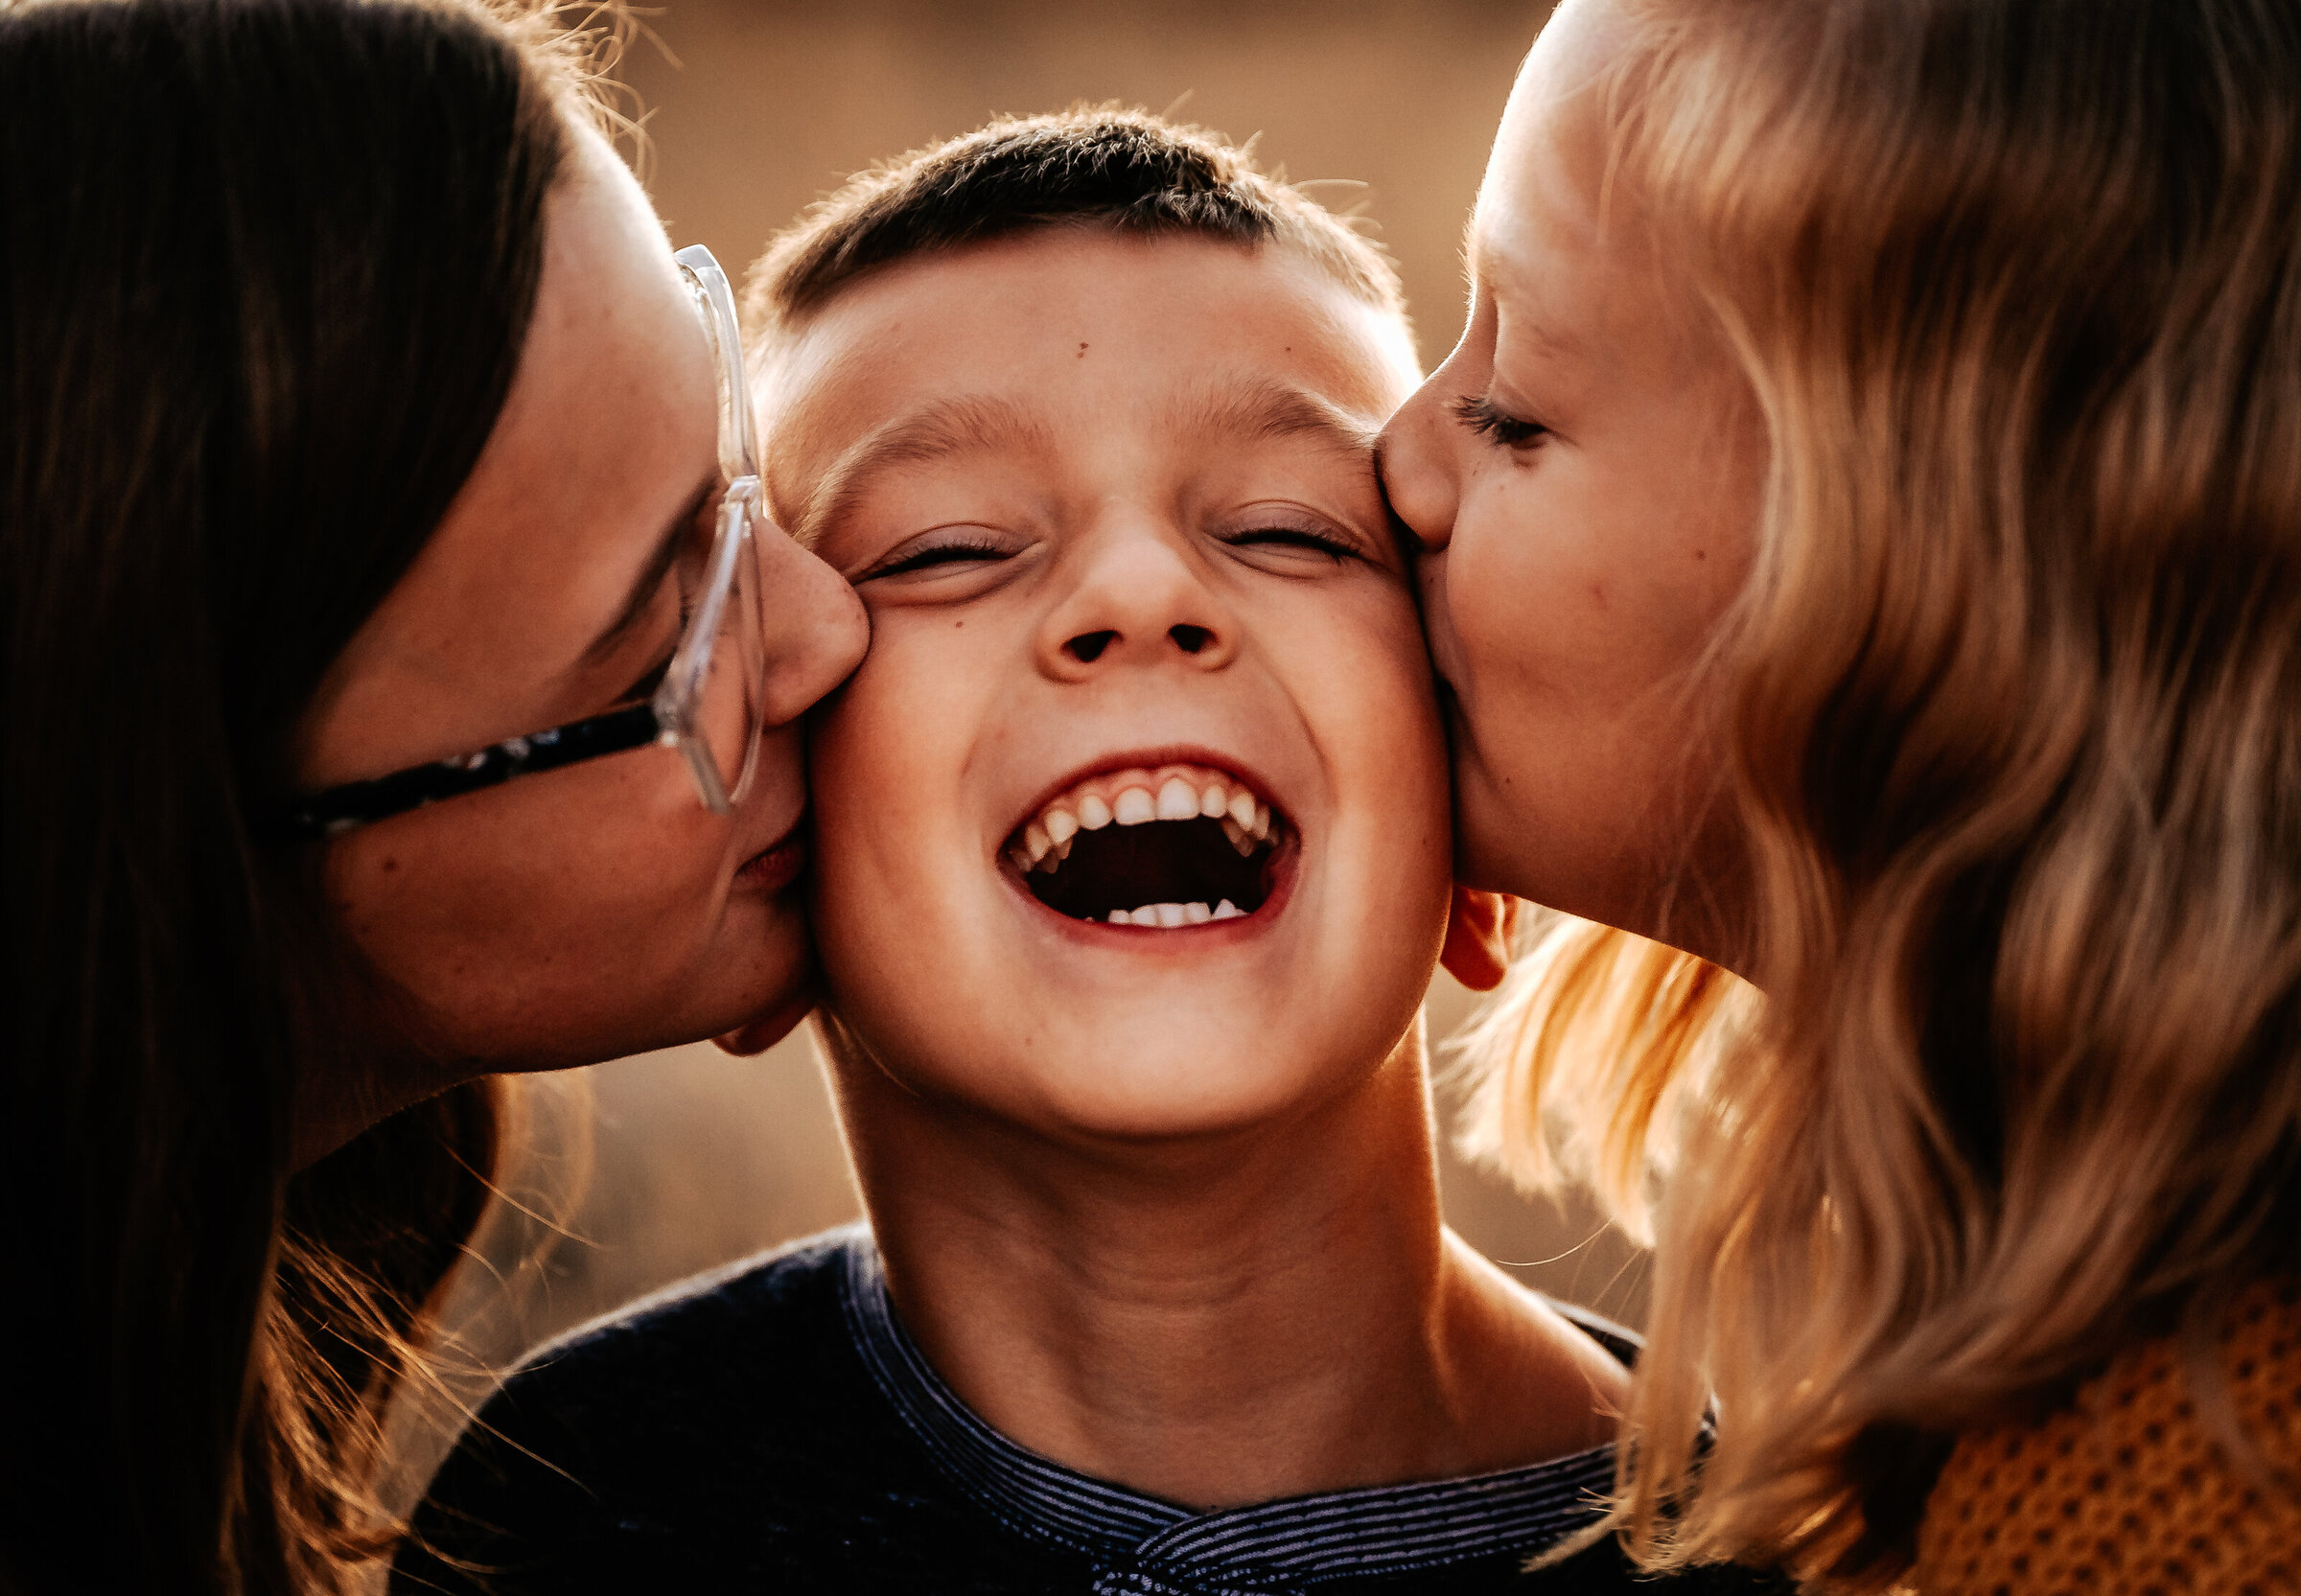 Sisters kiss younger brother on the cheeks while he laughs